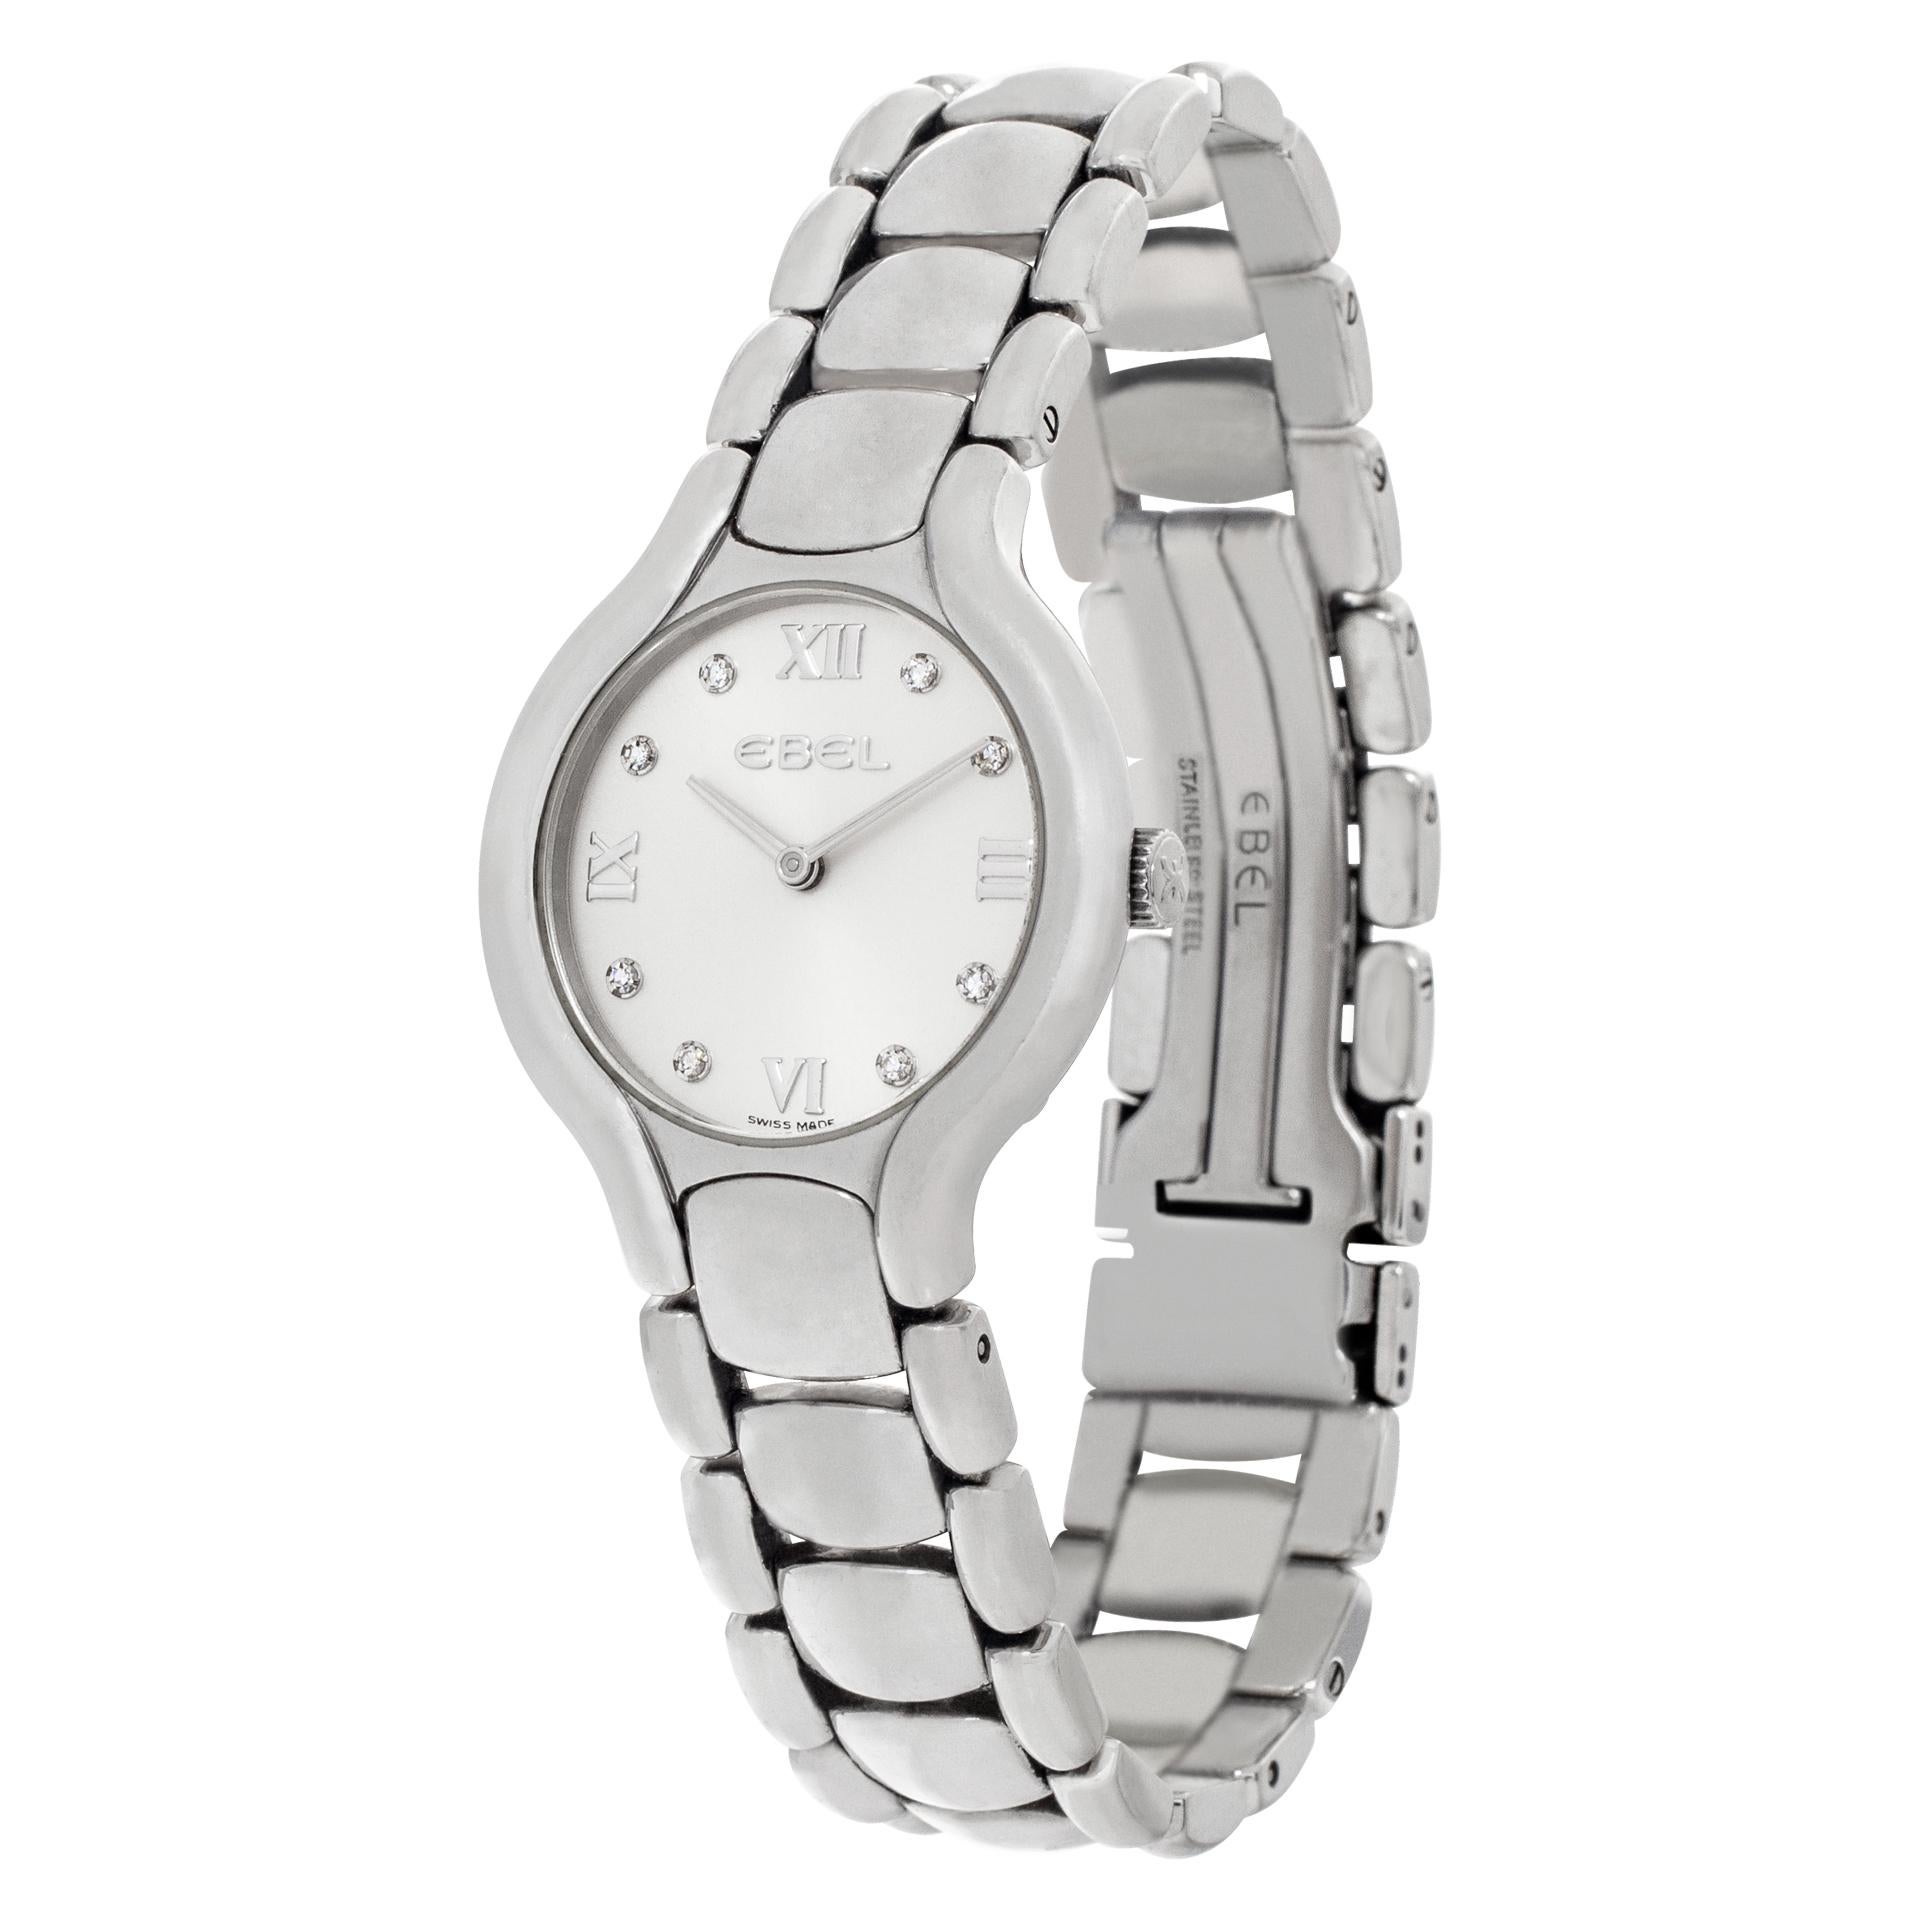 Ebel Beluga in stainless steel with silver diamond dial. Quartz. 27 mm case size. Ref 9157421. Circa 2000s. Fine Pre-owned Ebel Watch.

Certified preowned Classic Ebel Beluga 9157421 watch is made out of Stainless steel on a Stainless Steel bracelet